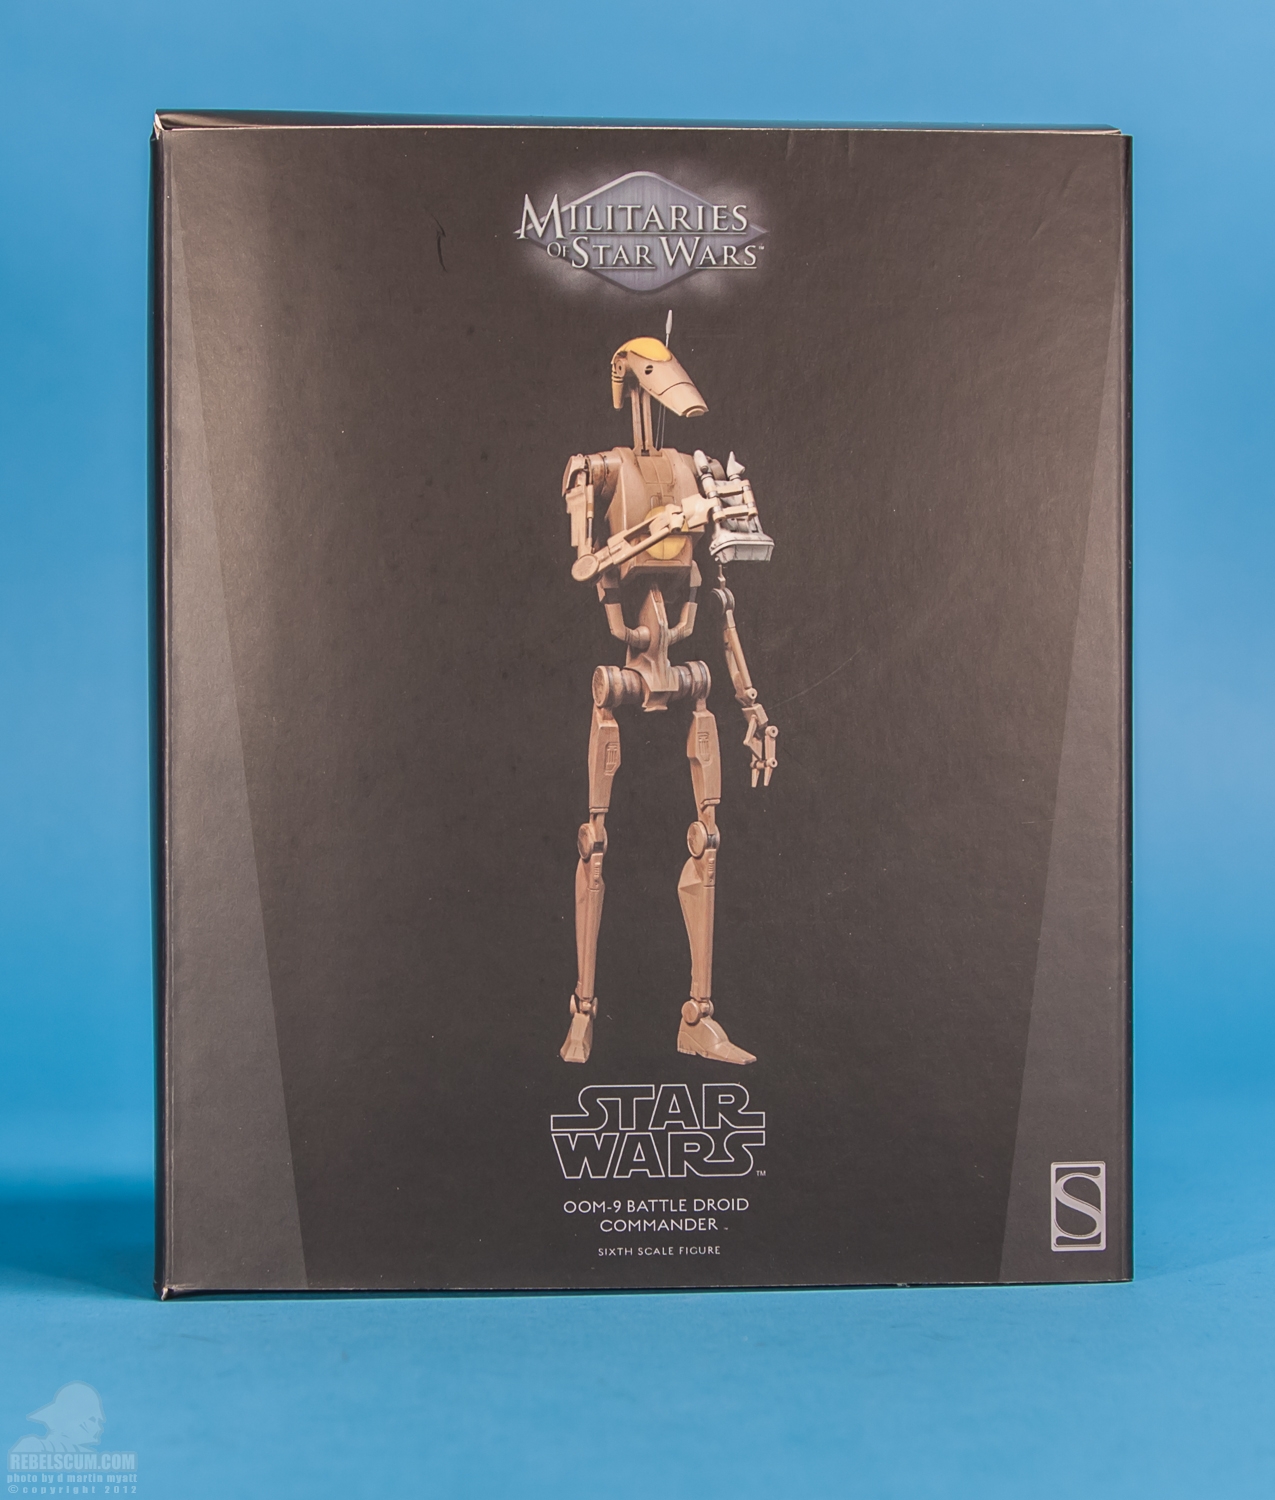 OOM-9_Battle_Droid_Commander_Sideshow_Collectibles-15.jpg